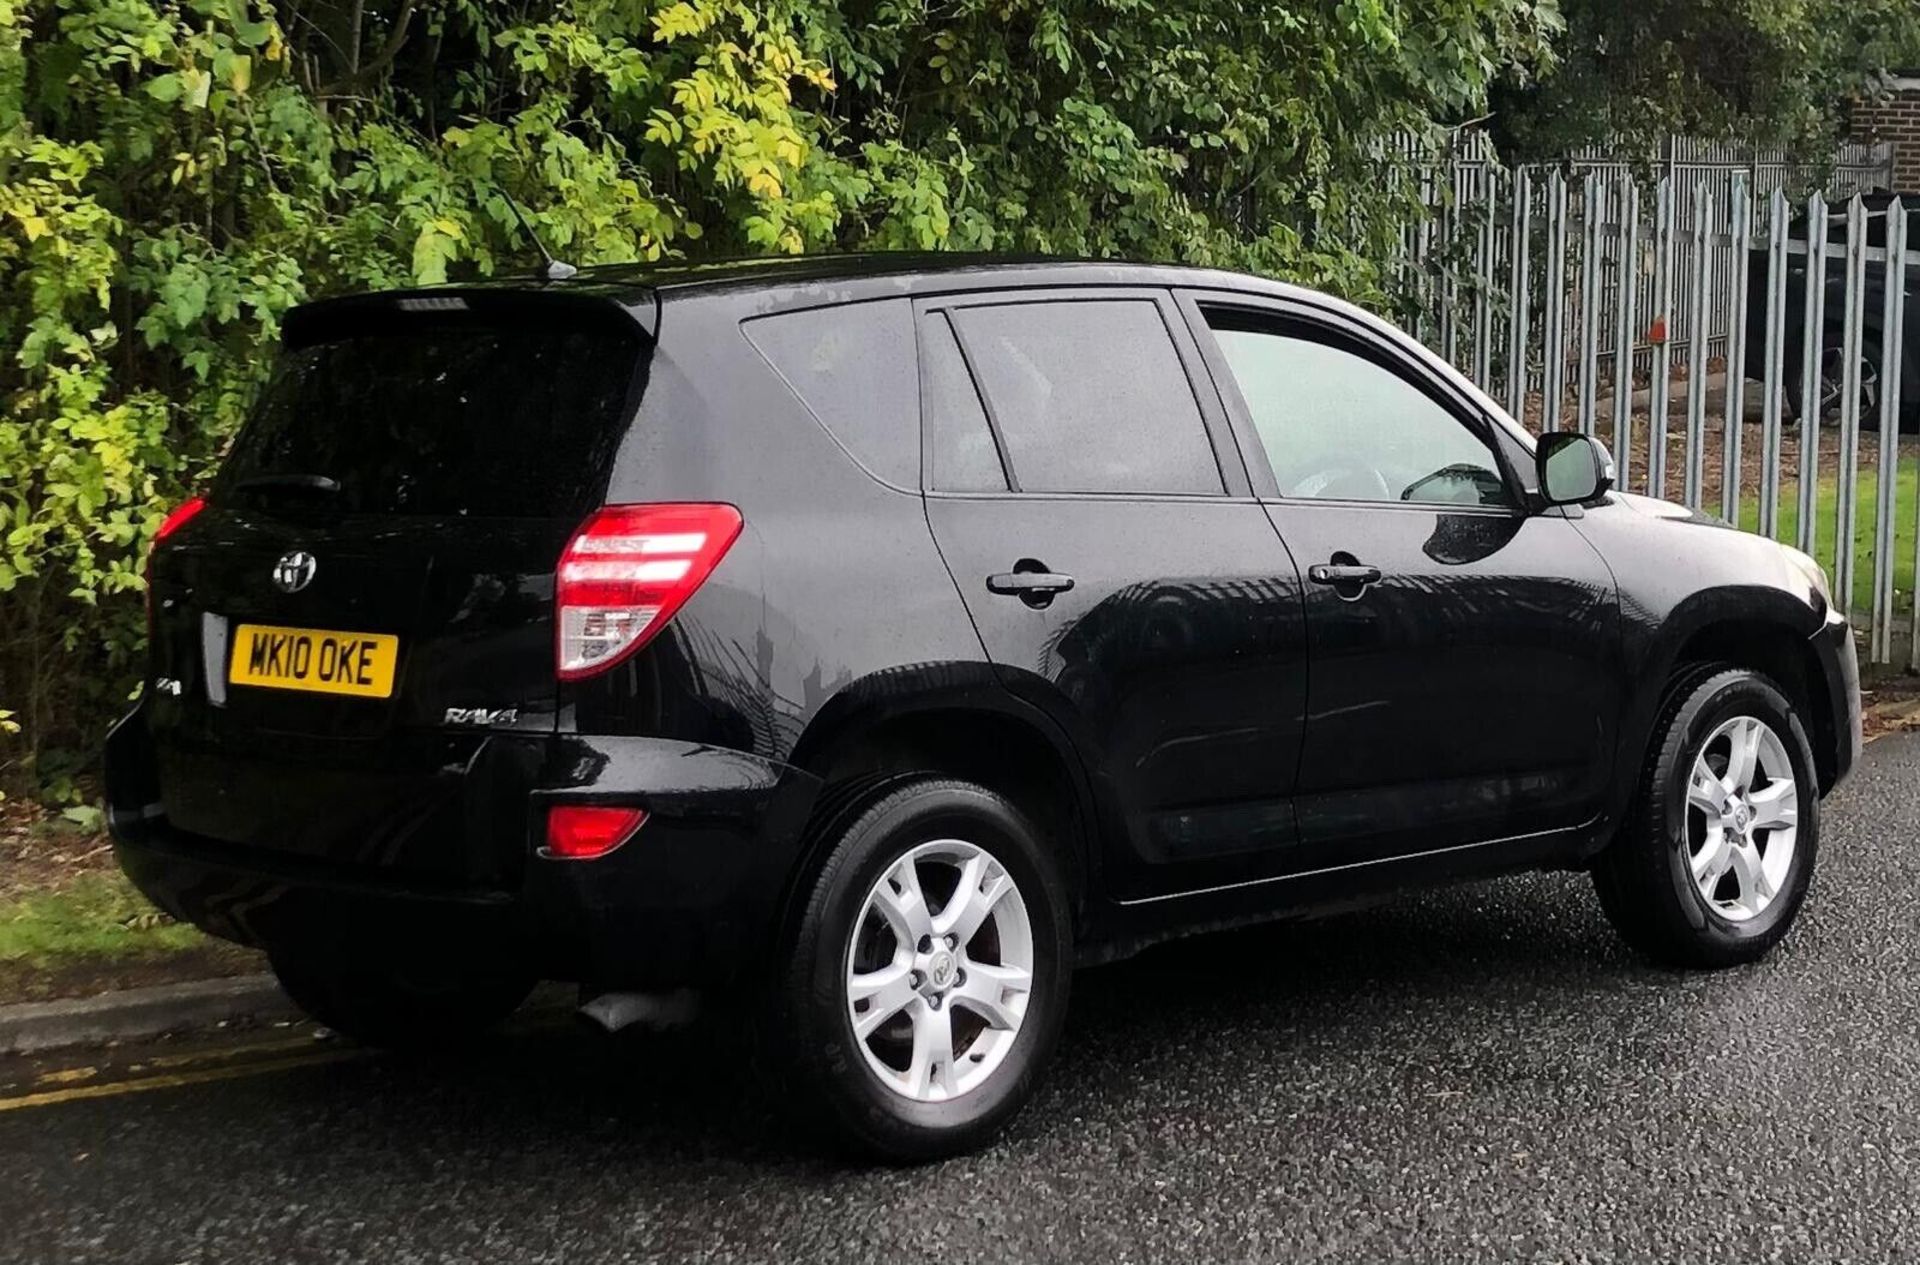 RELIABLE TOYOTA RAV4 2.2 D-4D XT-R: WELL-MAINTAINED 2010 MODEL - Image 8 of 14